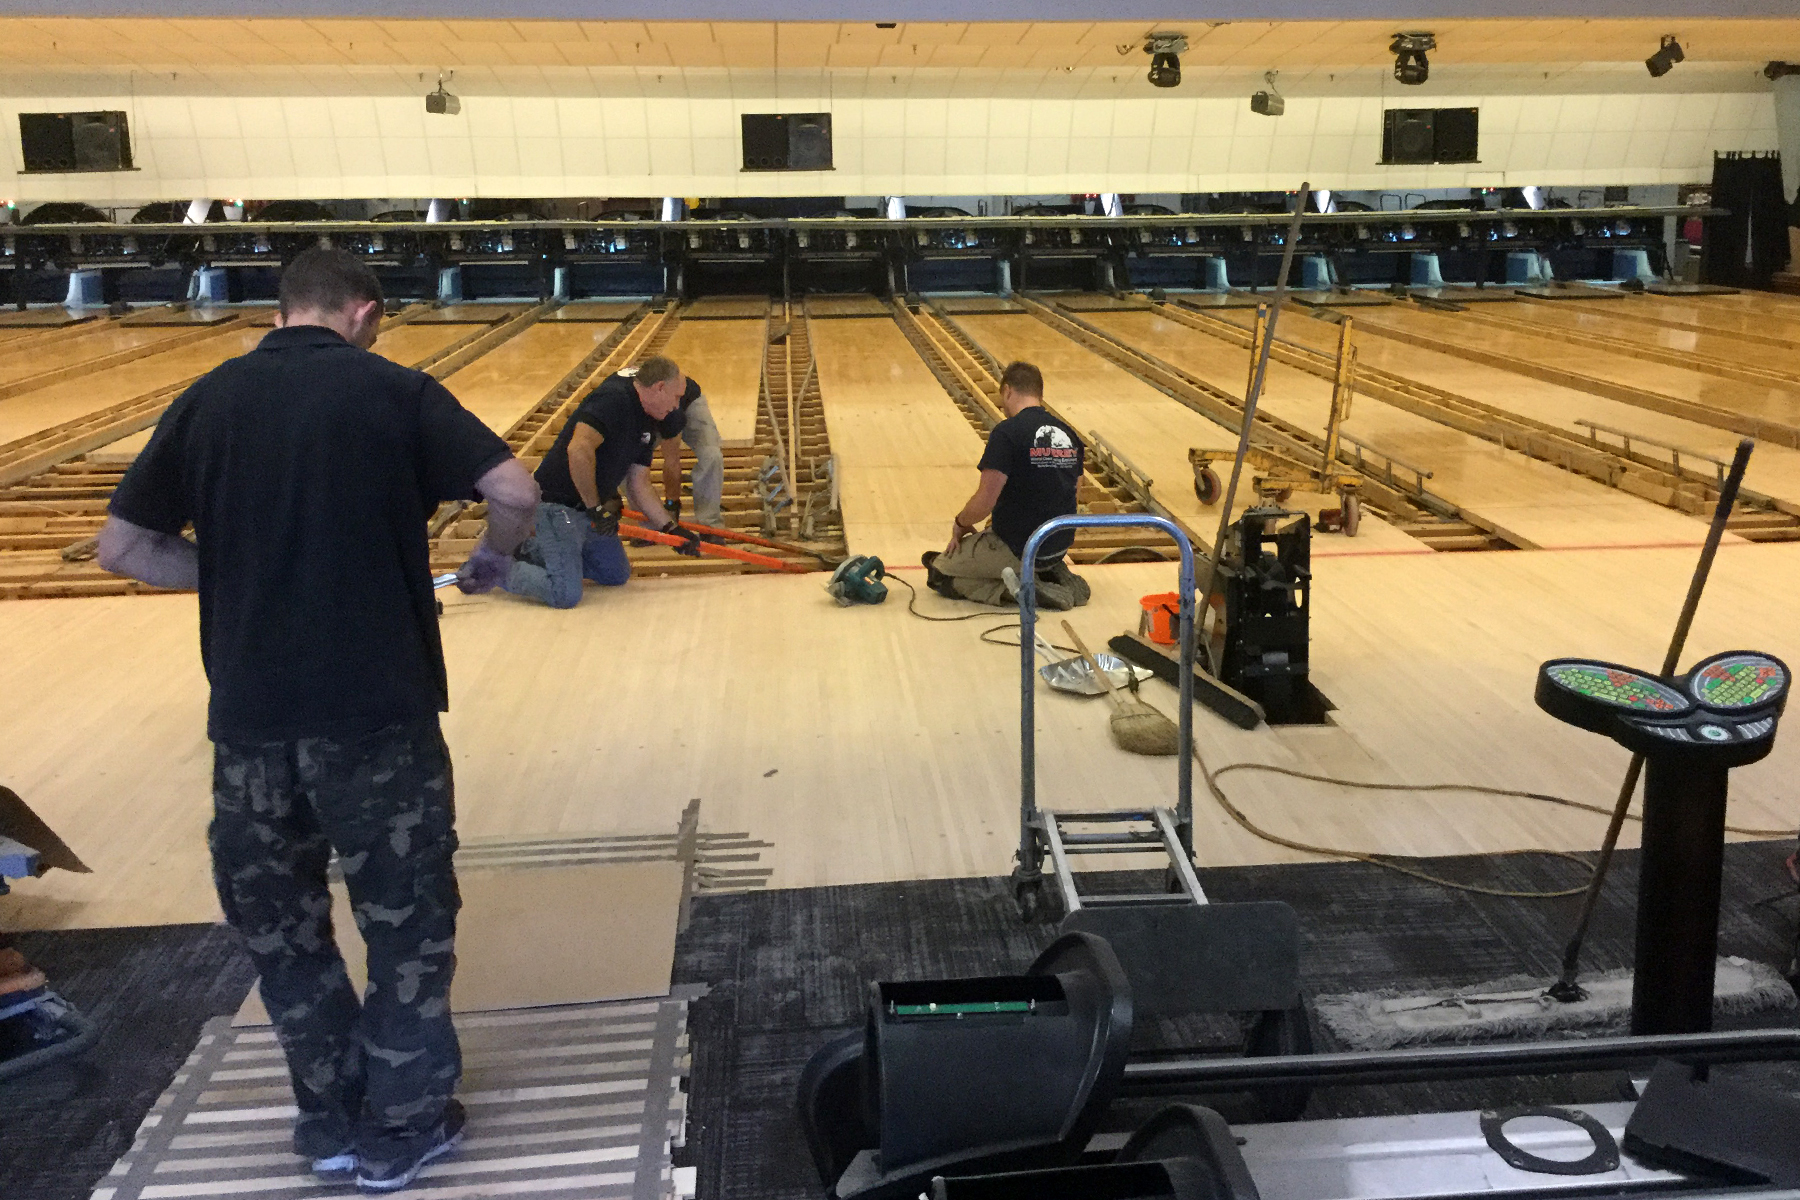 If bowling is how you roll: New upgrades for the Bowling Center ...